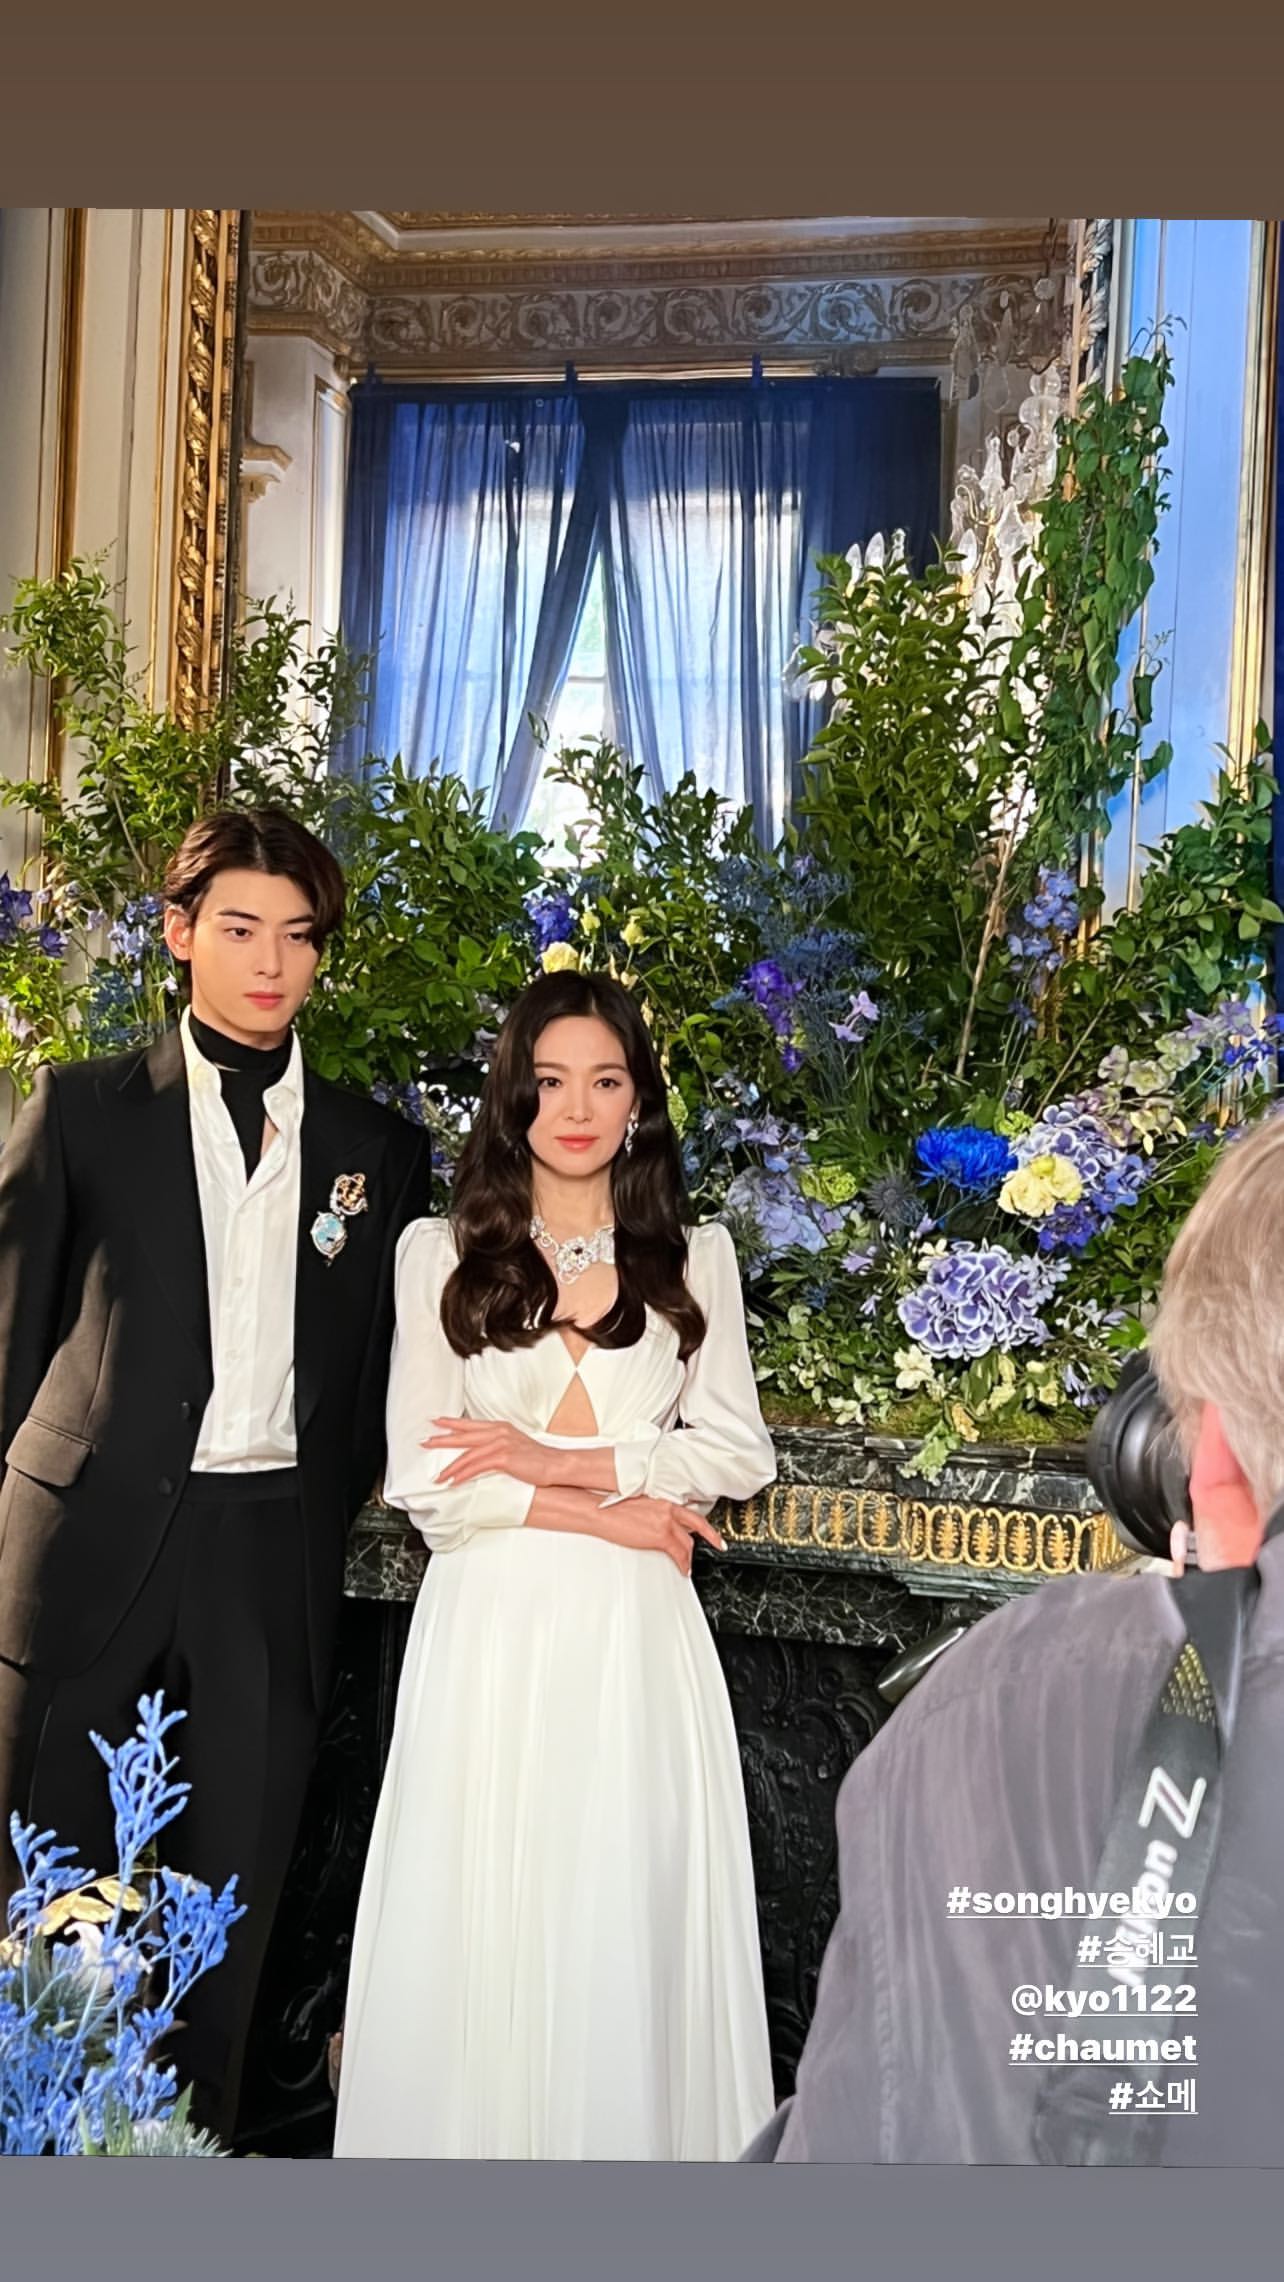 ChaEunWoo and #SongHyeKyo made their appearance at the historic Château de  Bagatelle in Paris to celebrate @chaumetofficial's new High…